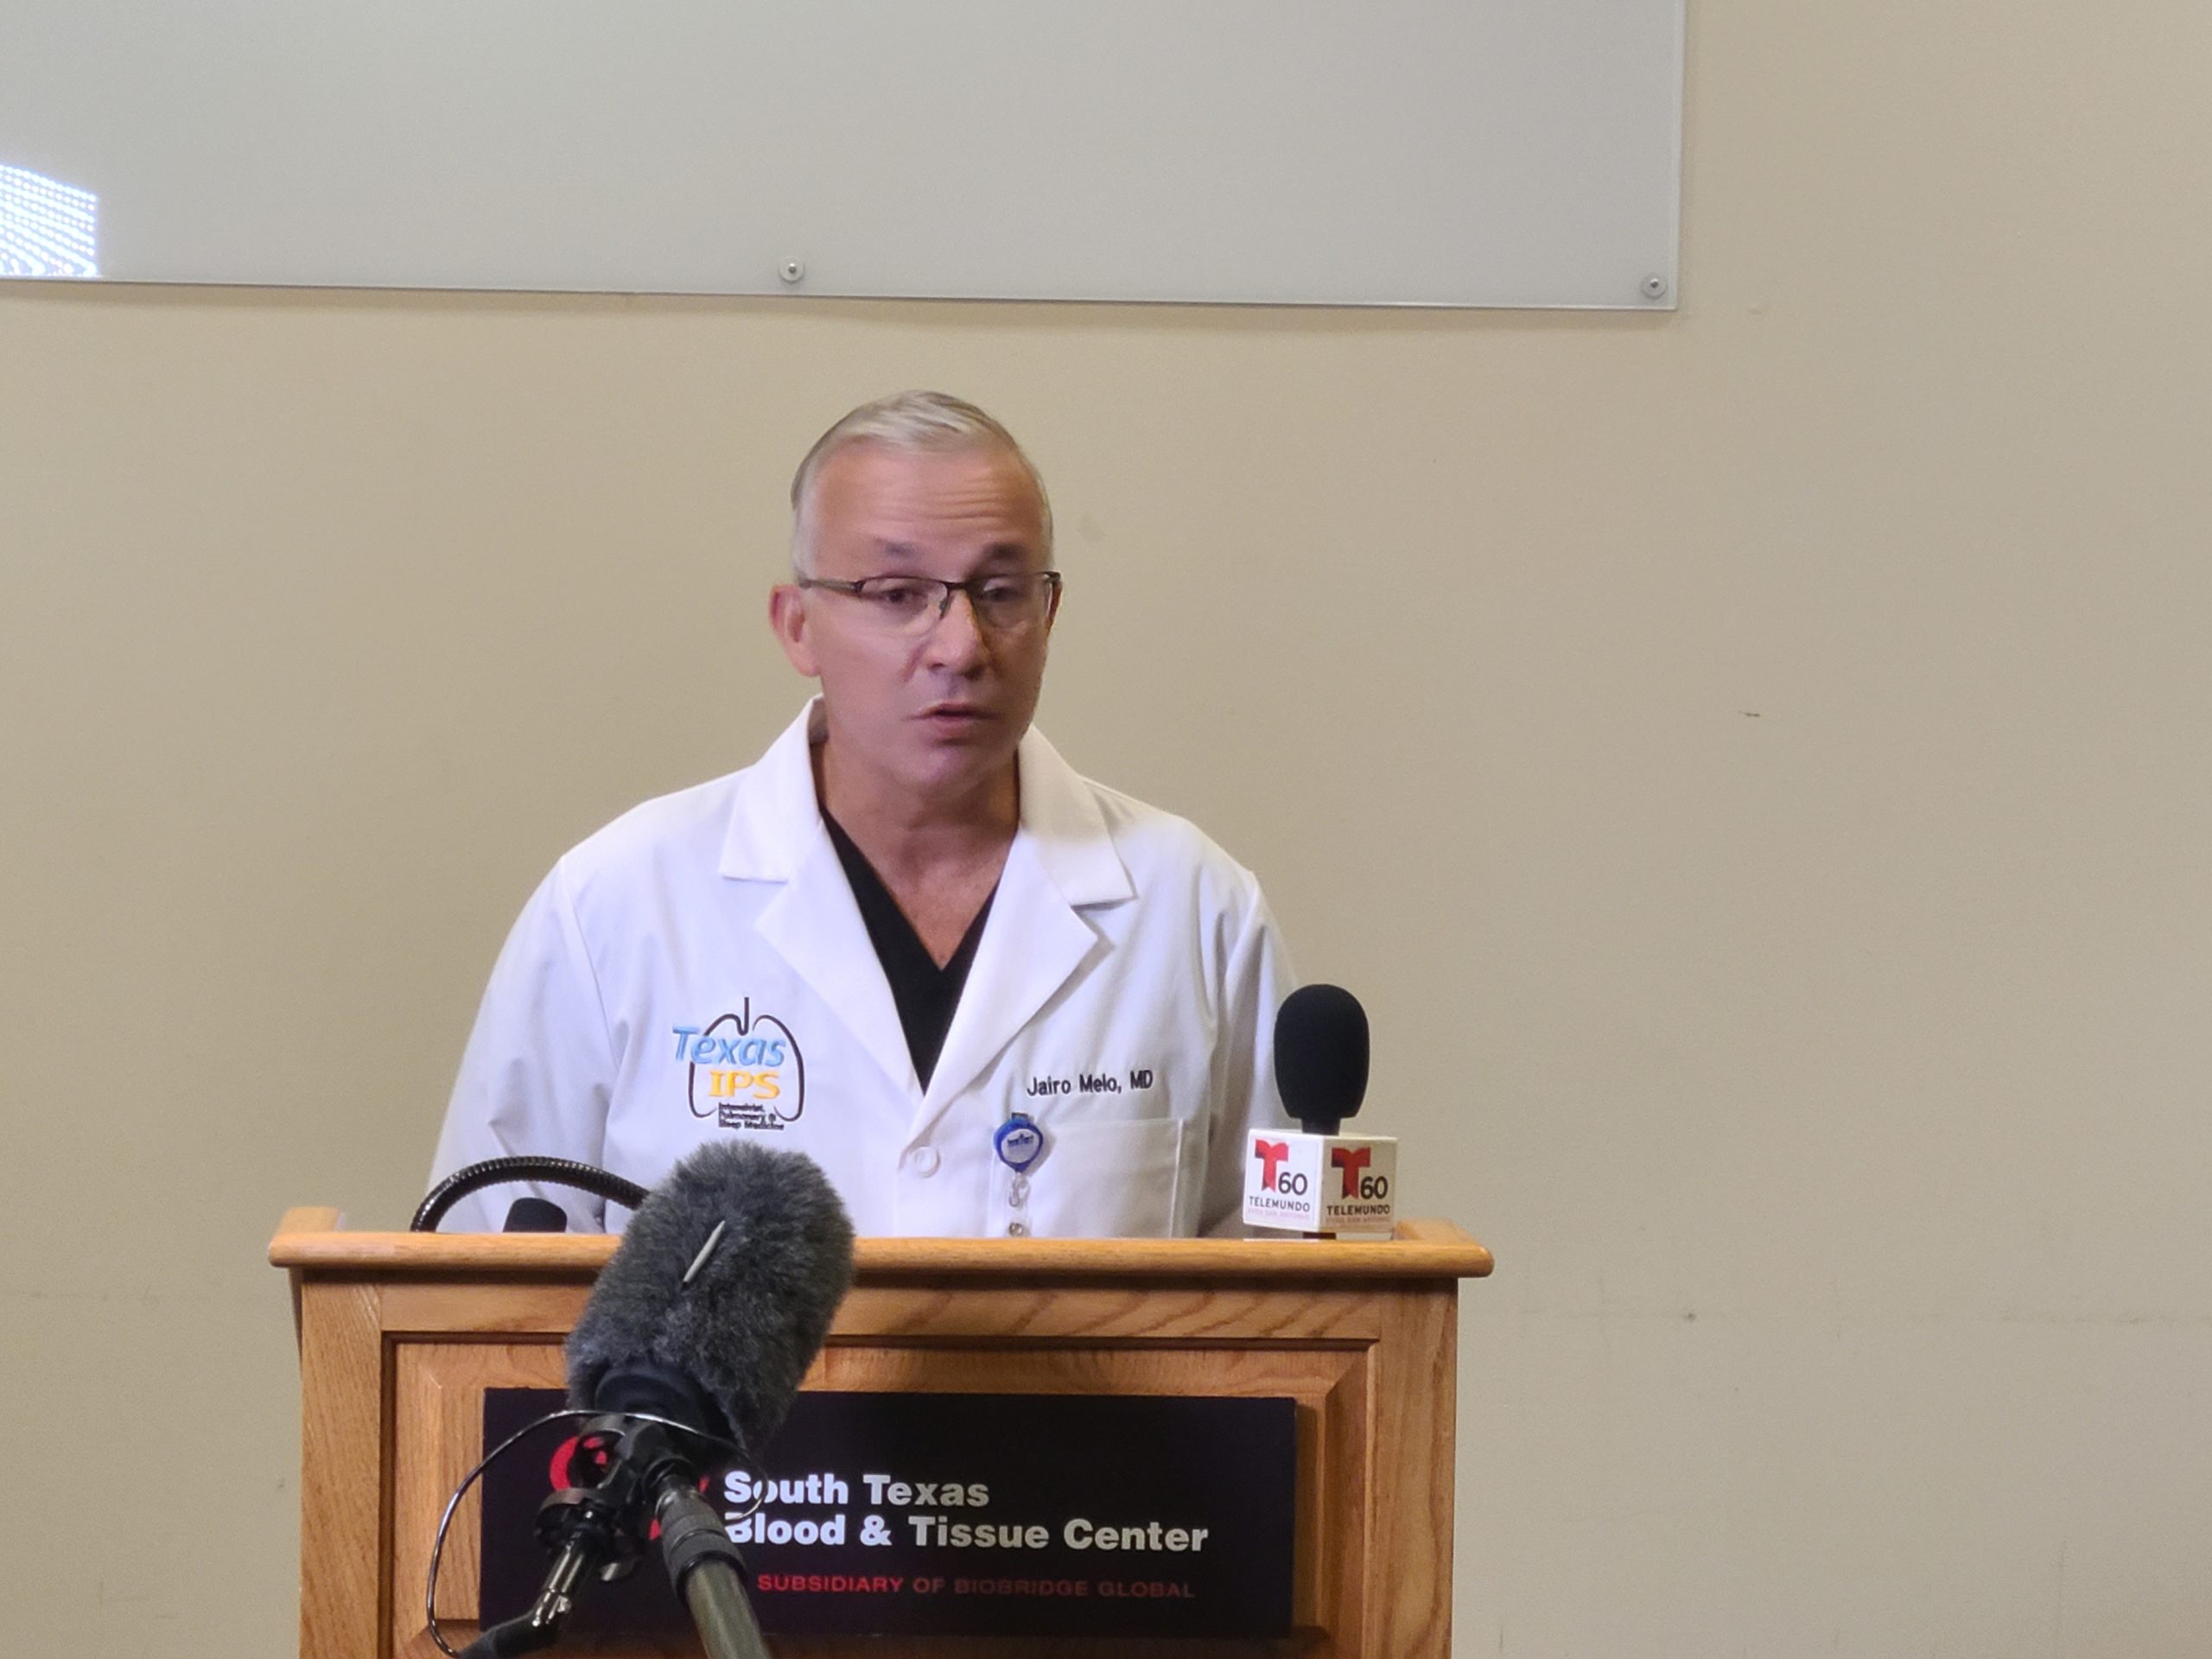 San Antonio doctor encourages recovered COVID-19 patients to donate plasma